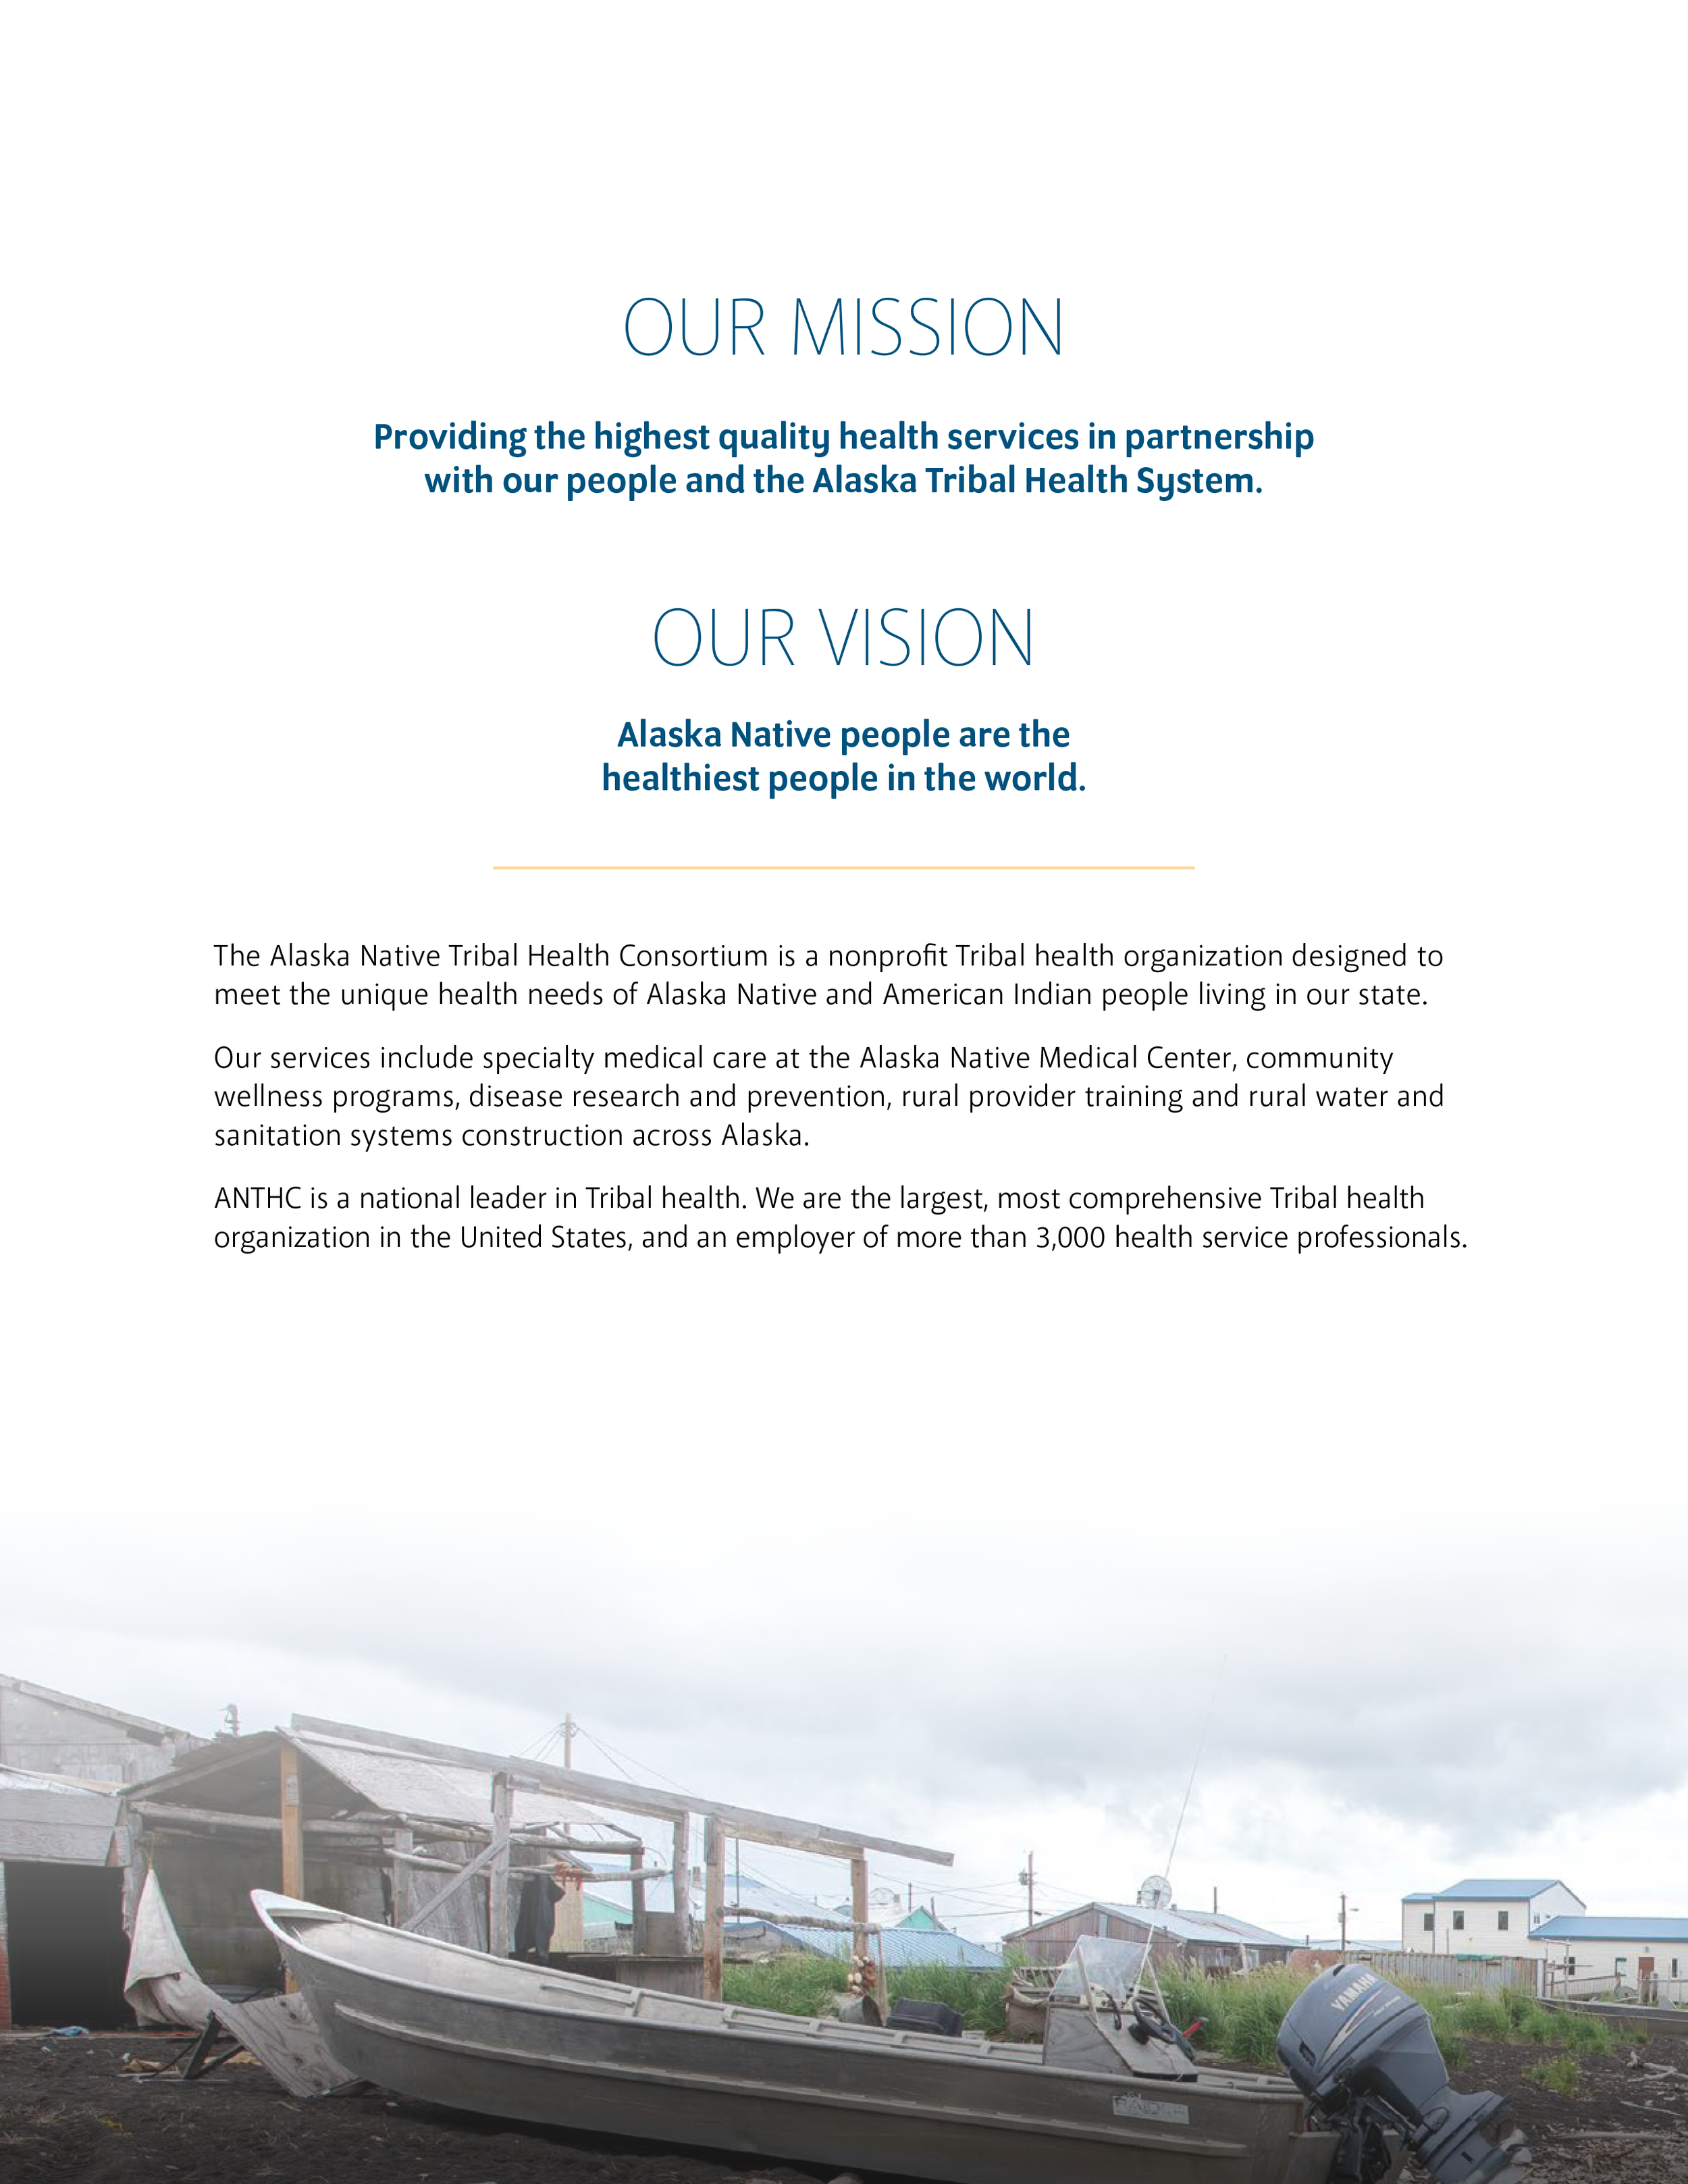 ANTHC Annual Report - Mission & Vision